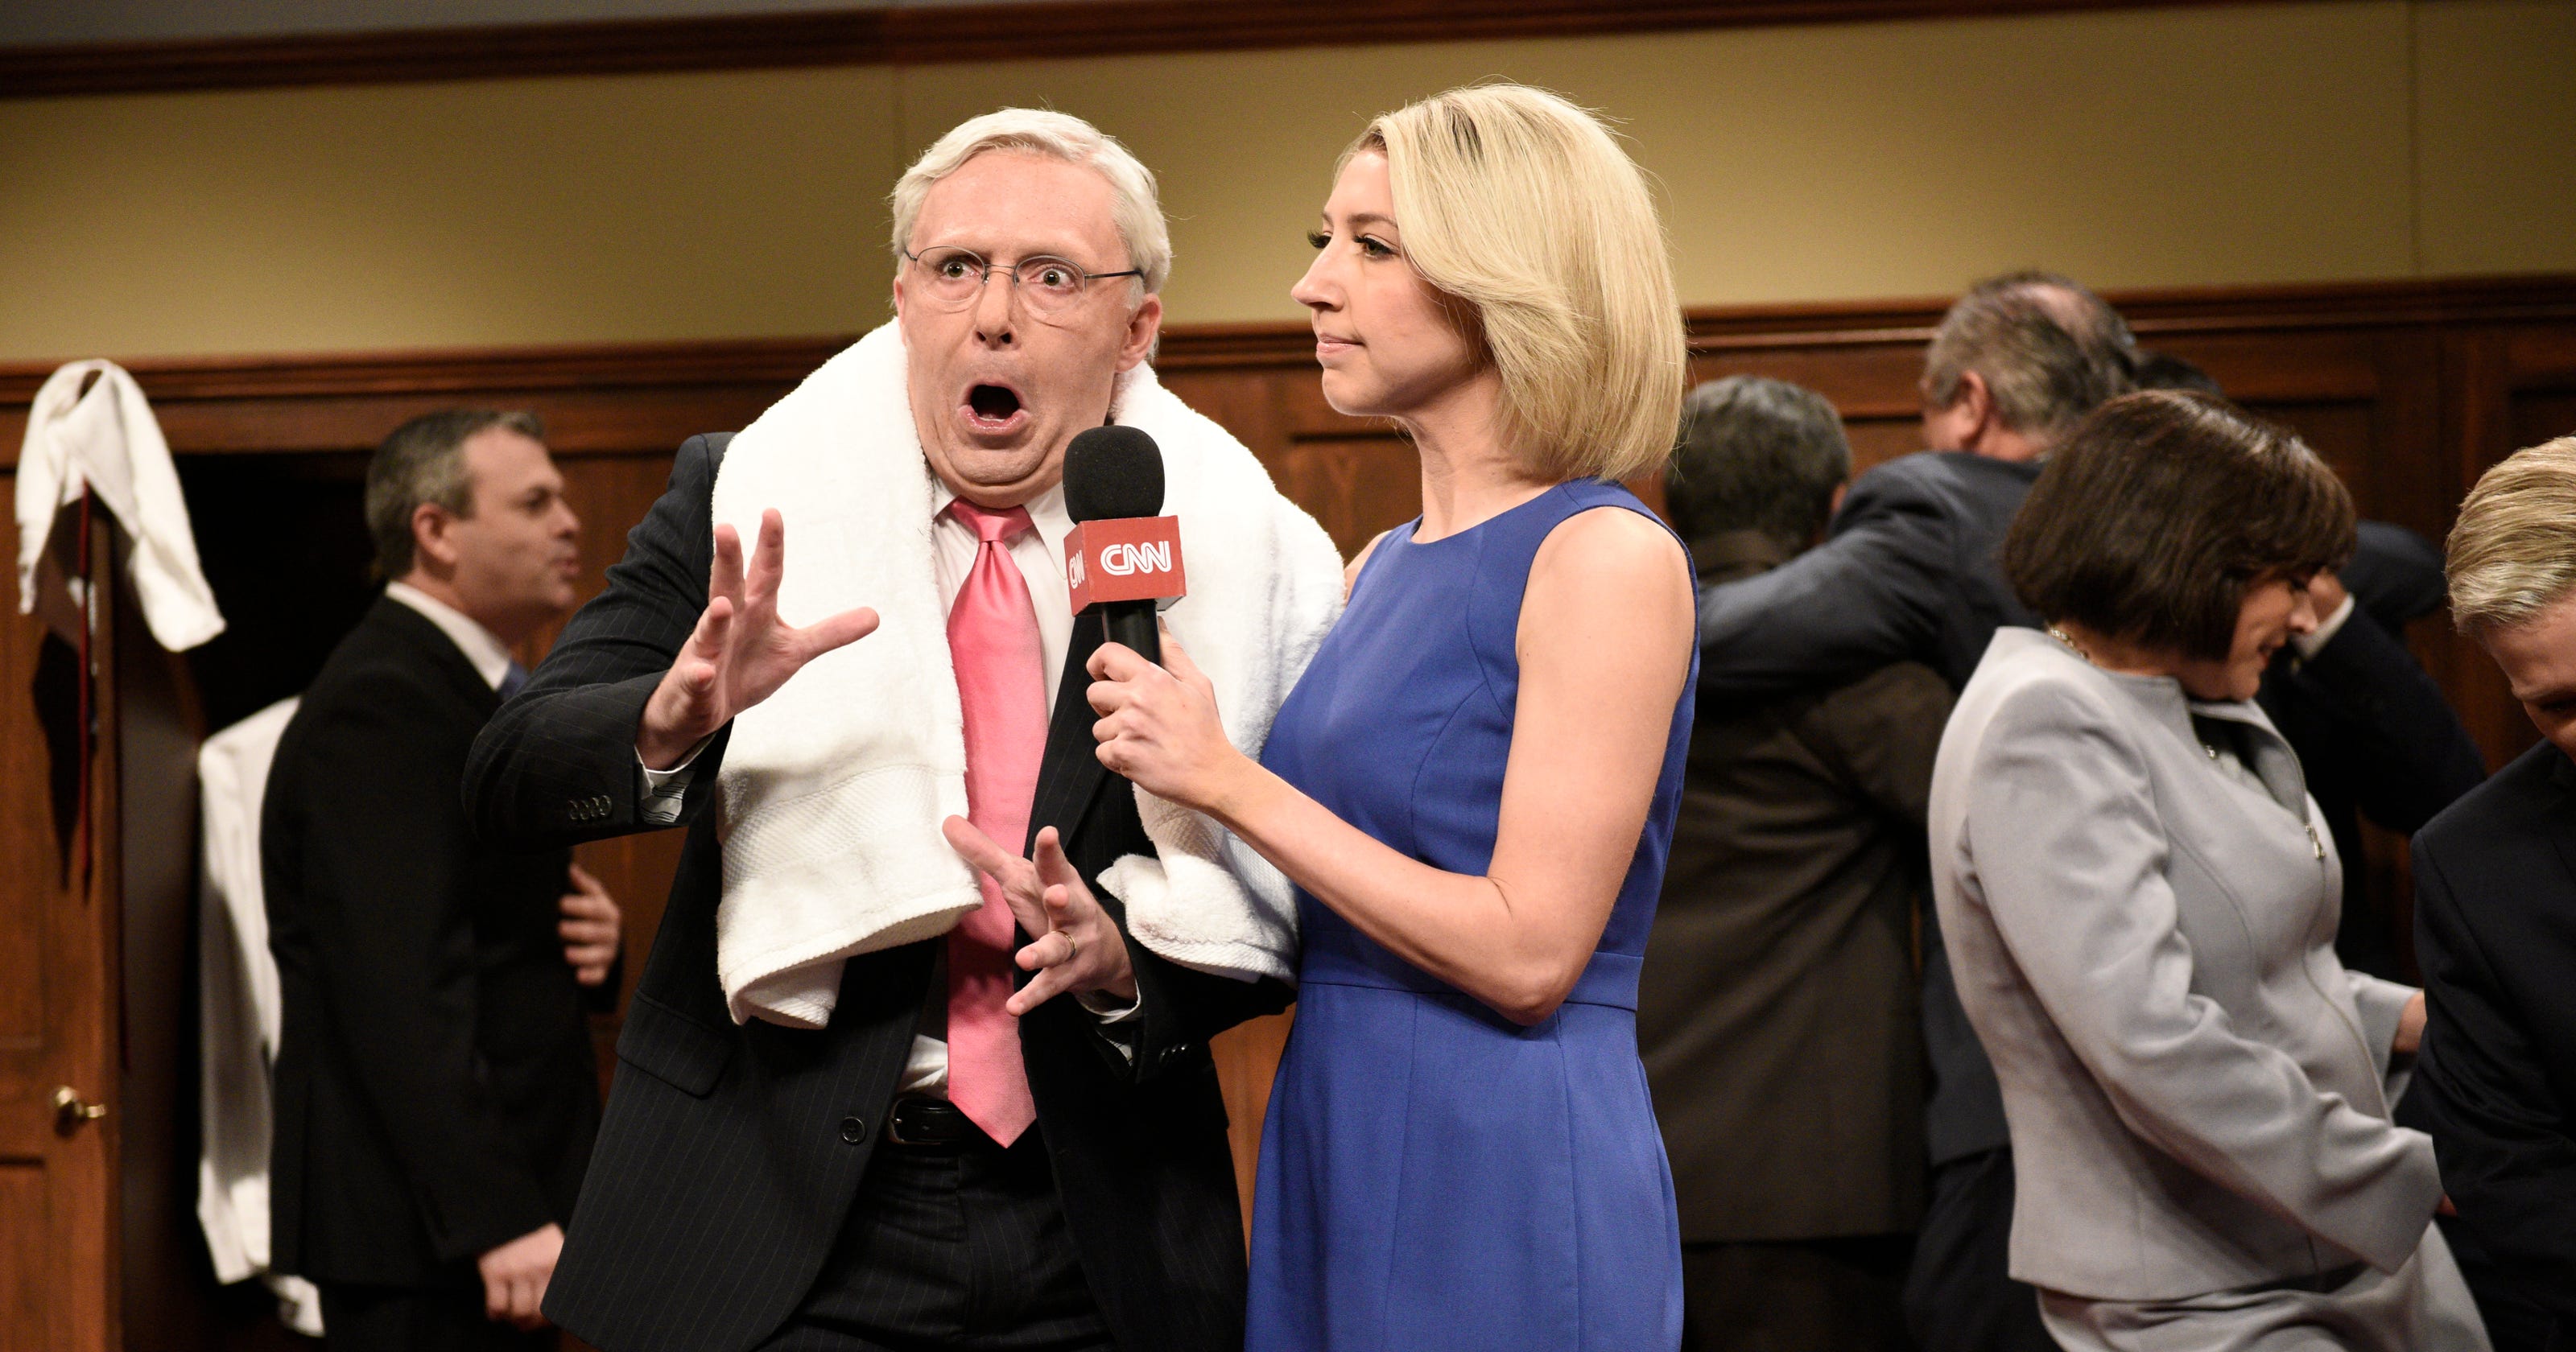 Snl In Photos The Best Moments From Saturday Night Live Season 44 